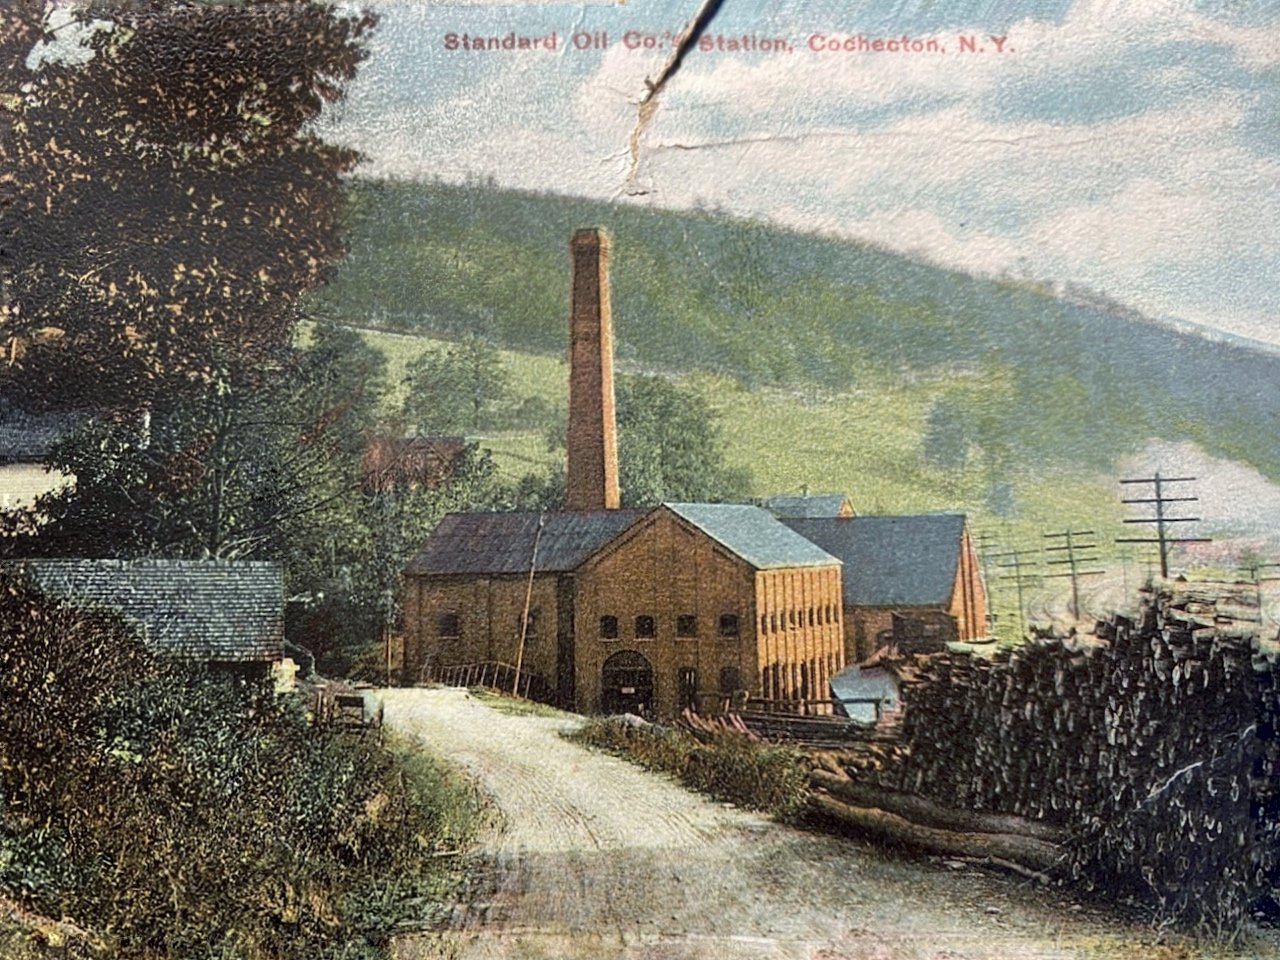 A historic postcard shows the Standard Oil pumphouse.  To safeguard against the possibility of fire, either from combustion of the flammable material being transported or from the eight coal-burning furnaces used to power the oil pumps, the four-story building was framed with nonflammable materials. The walls were brick, the girders iron, the roof sheet metal and the windowsills bluestone.